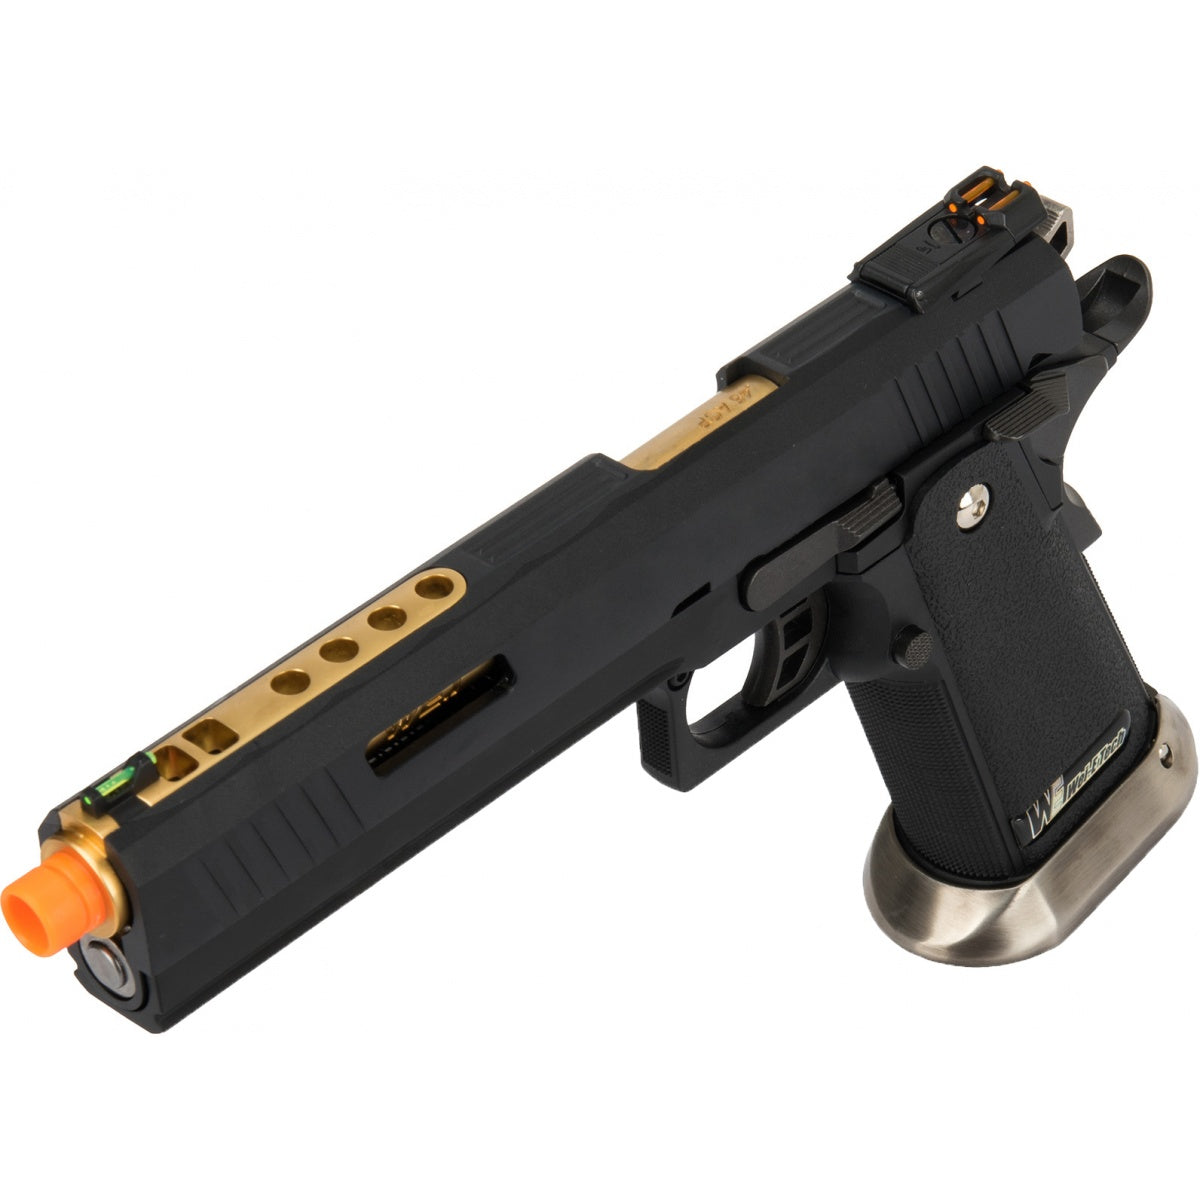 WE Tech 1911 Hi-Capa T-Rex Competition Gas Blowback Airsoft Pistol w/ Sight Mount & Top Ports (BLACK / GOLD) - ssairsoft